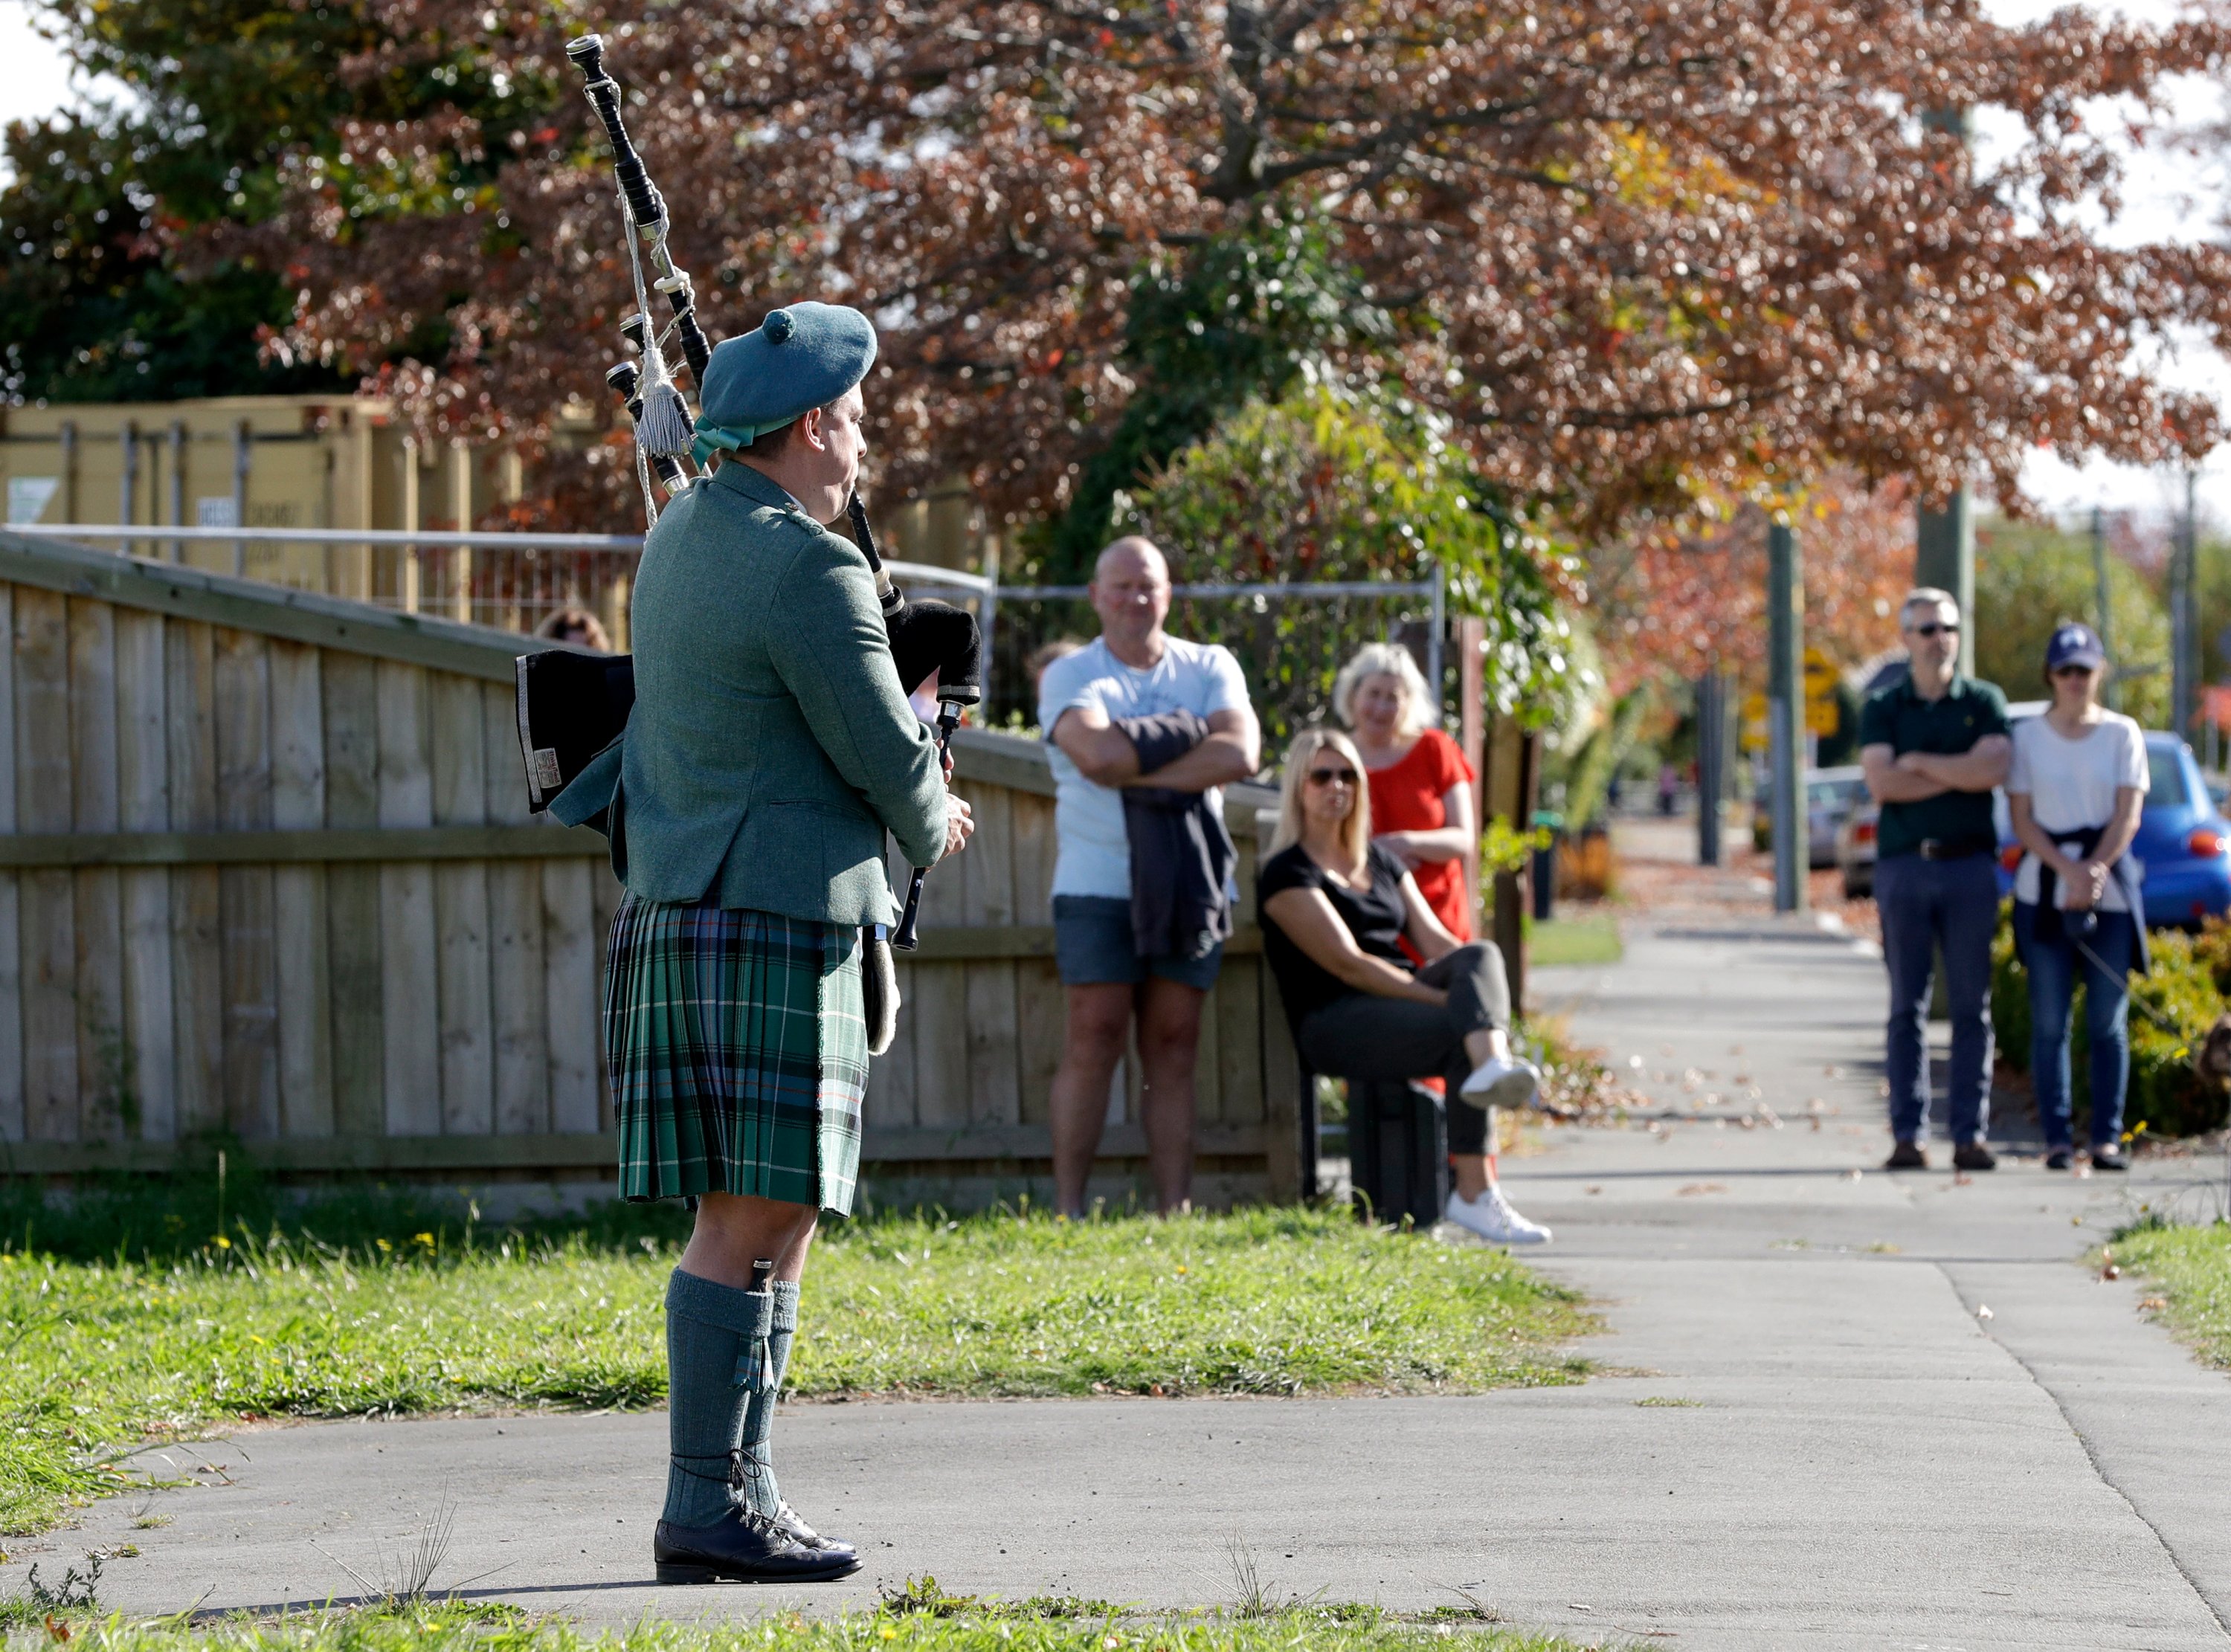 Neighbors watch as Tom Glover plays the bagpipes to commemorate Anzac Day in a suburb of Christchurch, New Zealand, Saturday, April 25, 2020. (AP Photo)